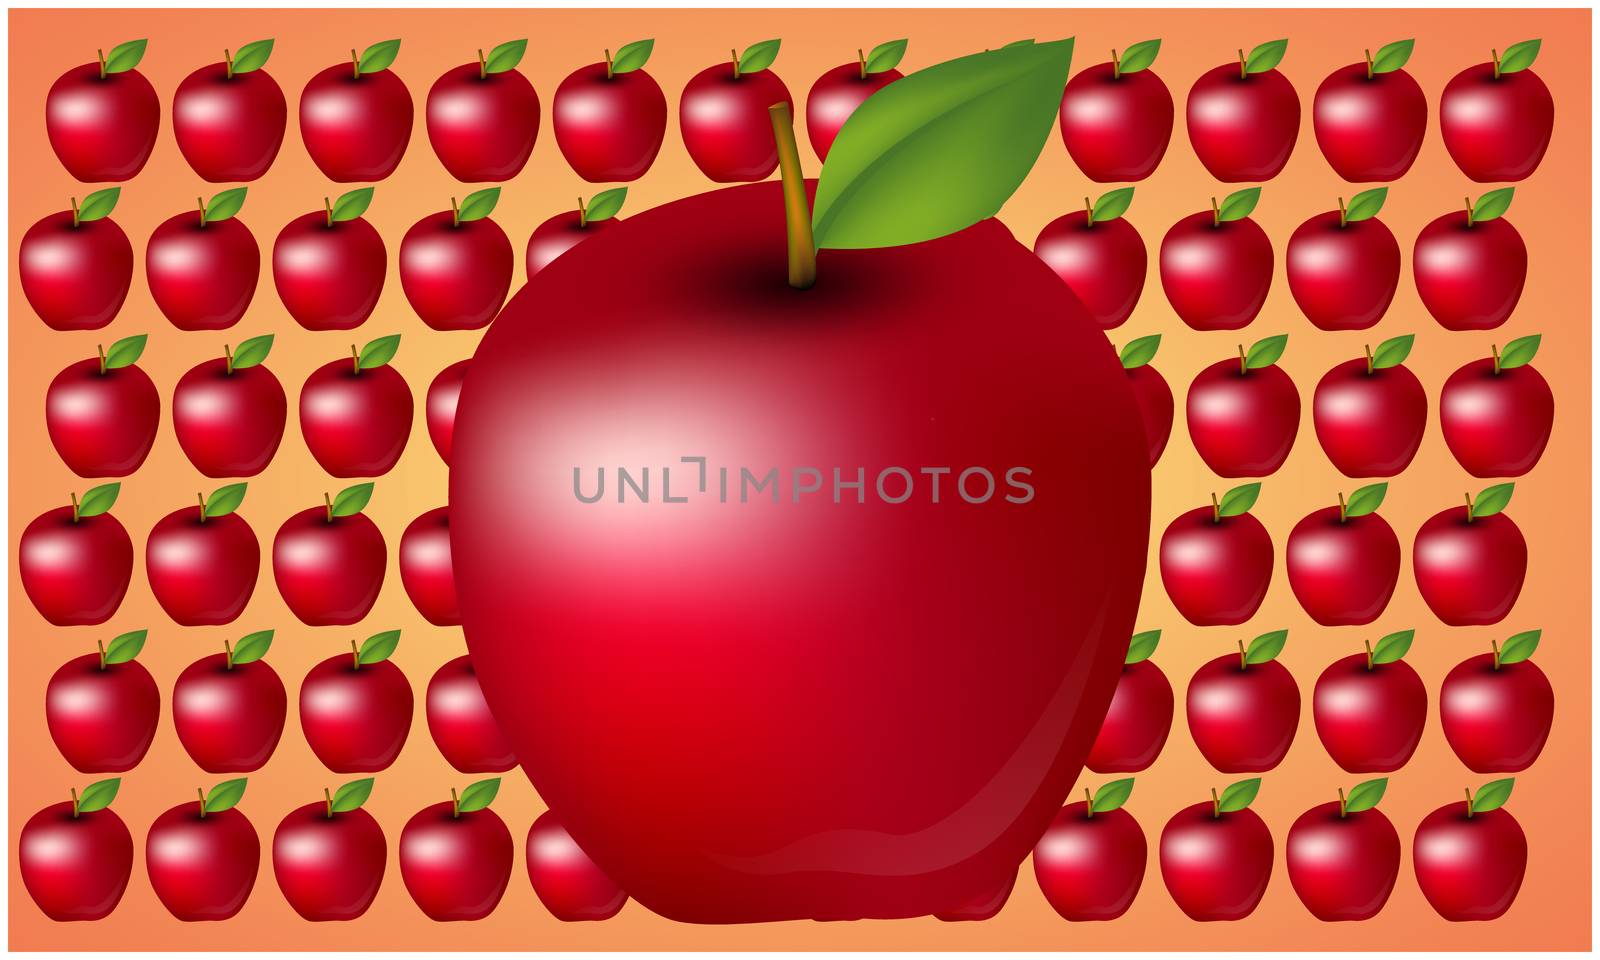 mock up illustration of realistic apples on abstract background